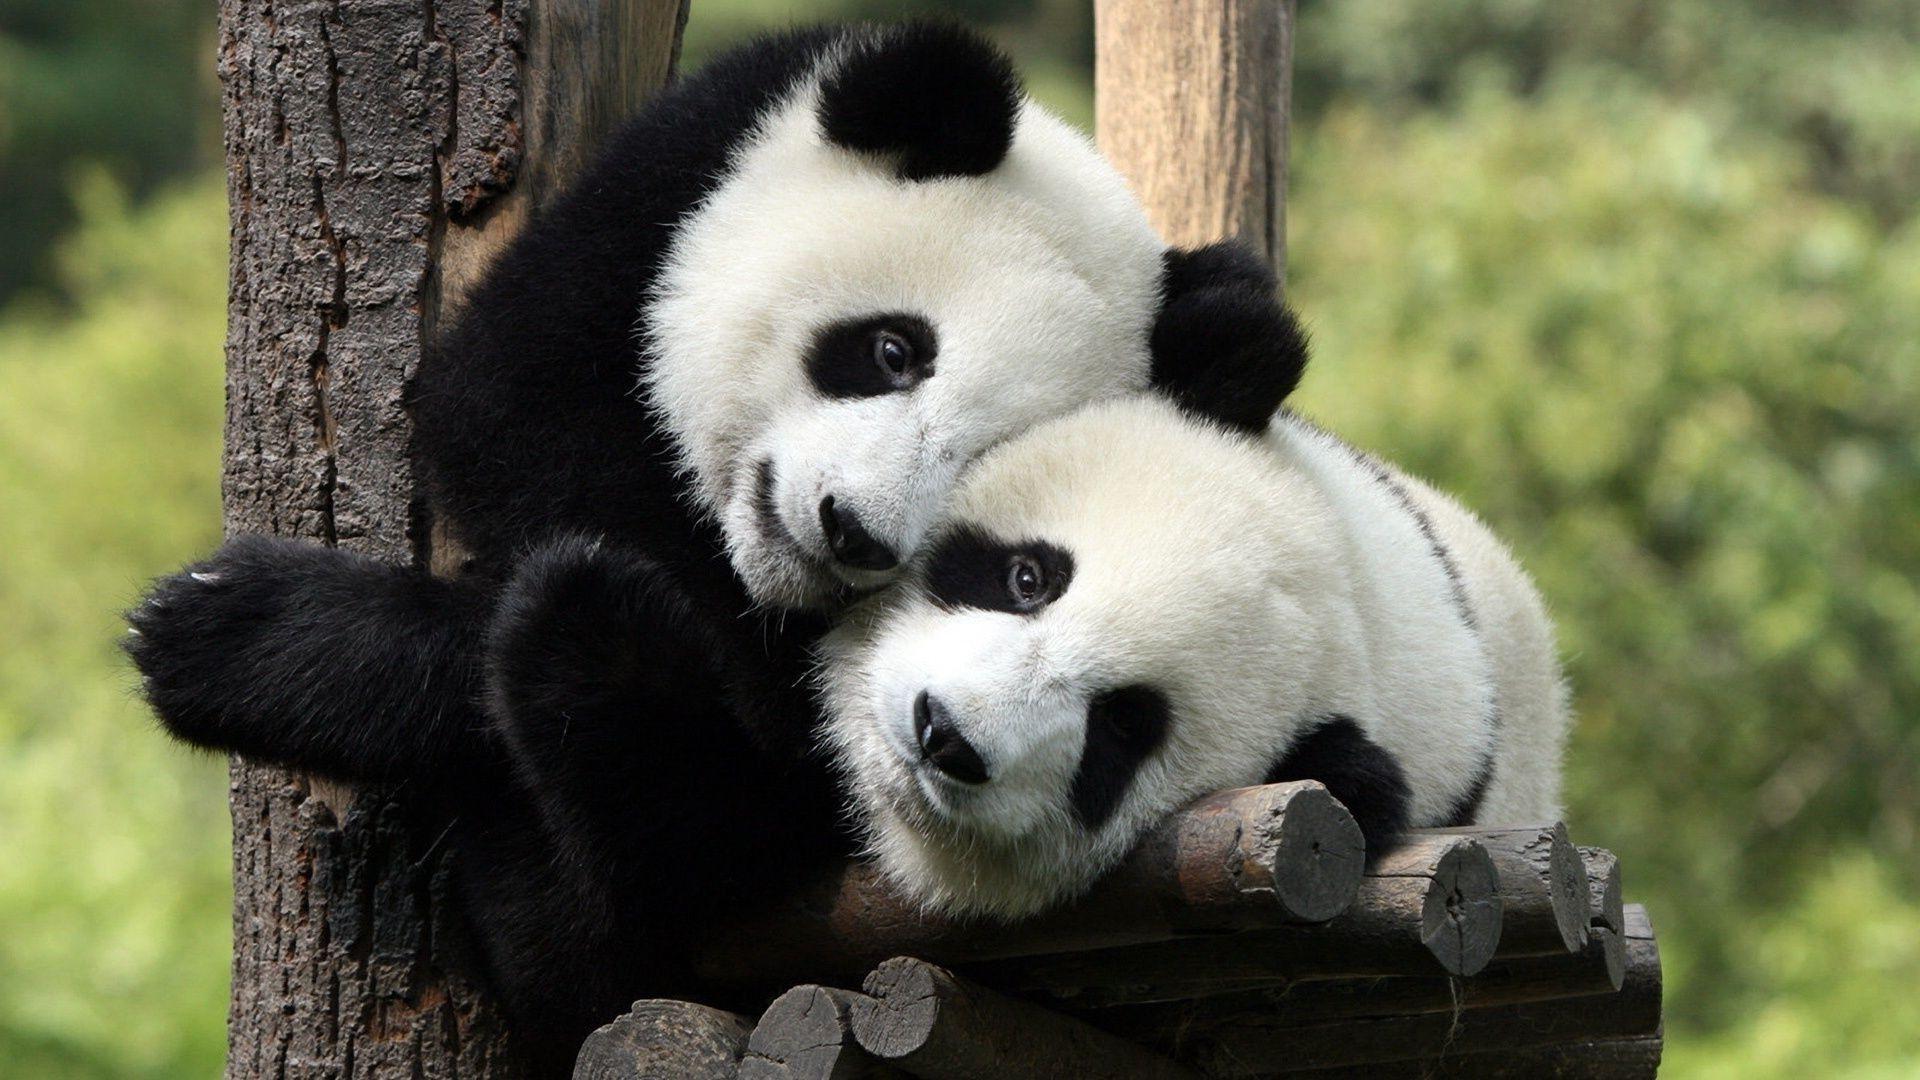 Cute children hugging pandas. Android wallpaper for free